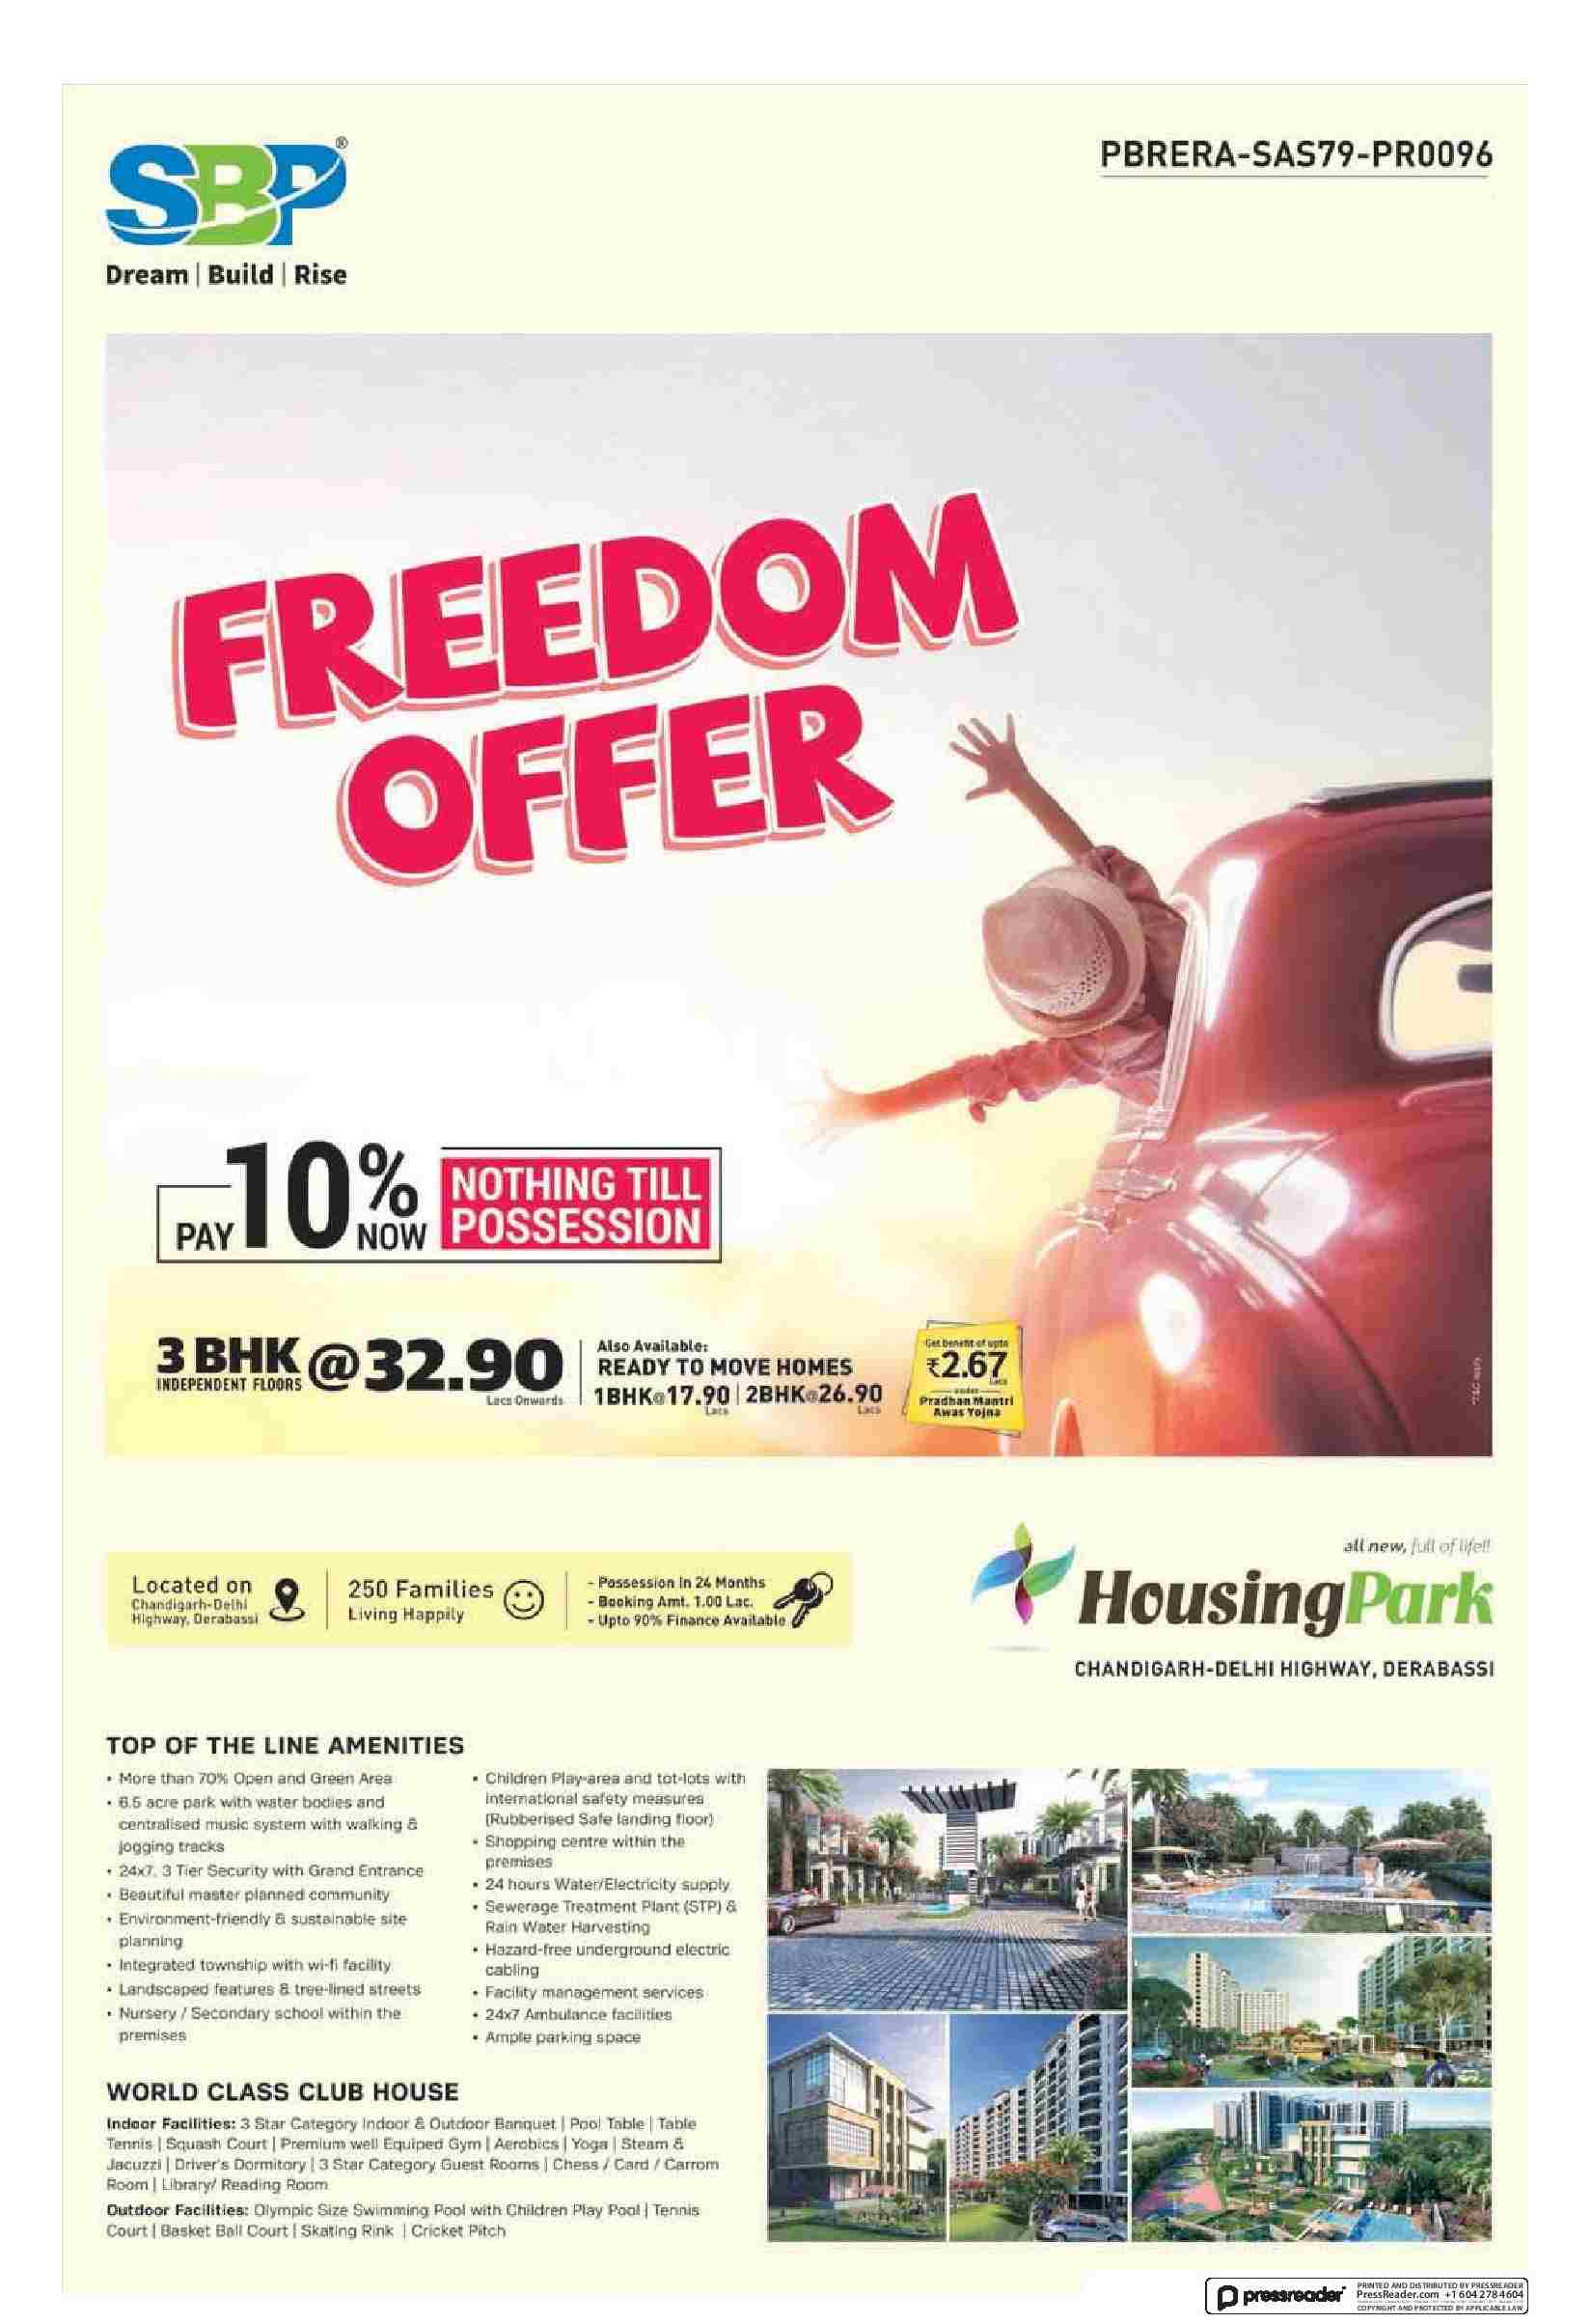 Pay 10% now and nothing till possession at SBP Housing Park in Chandigarh Update